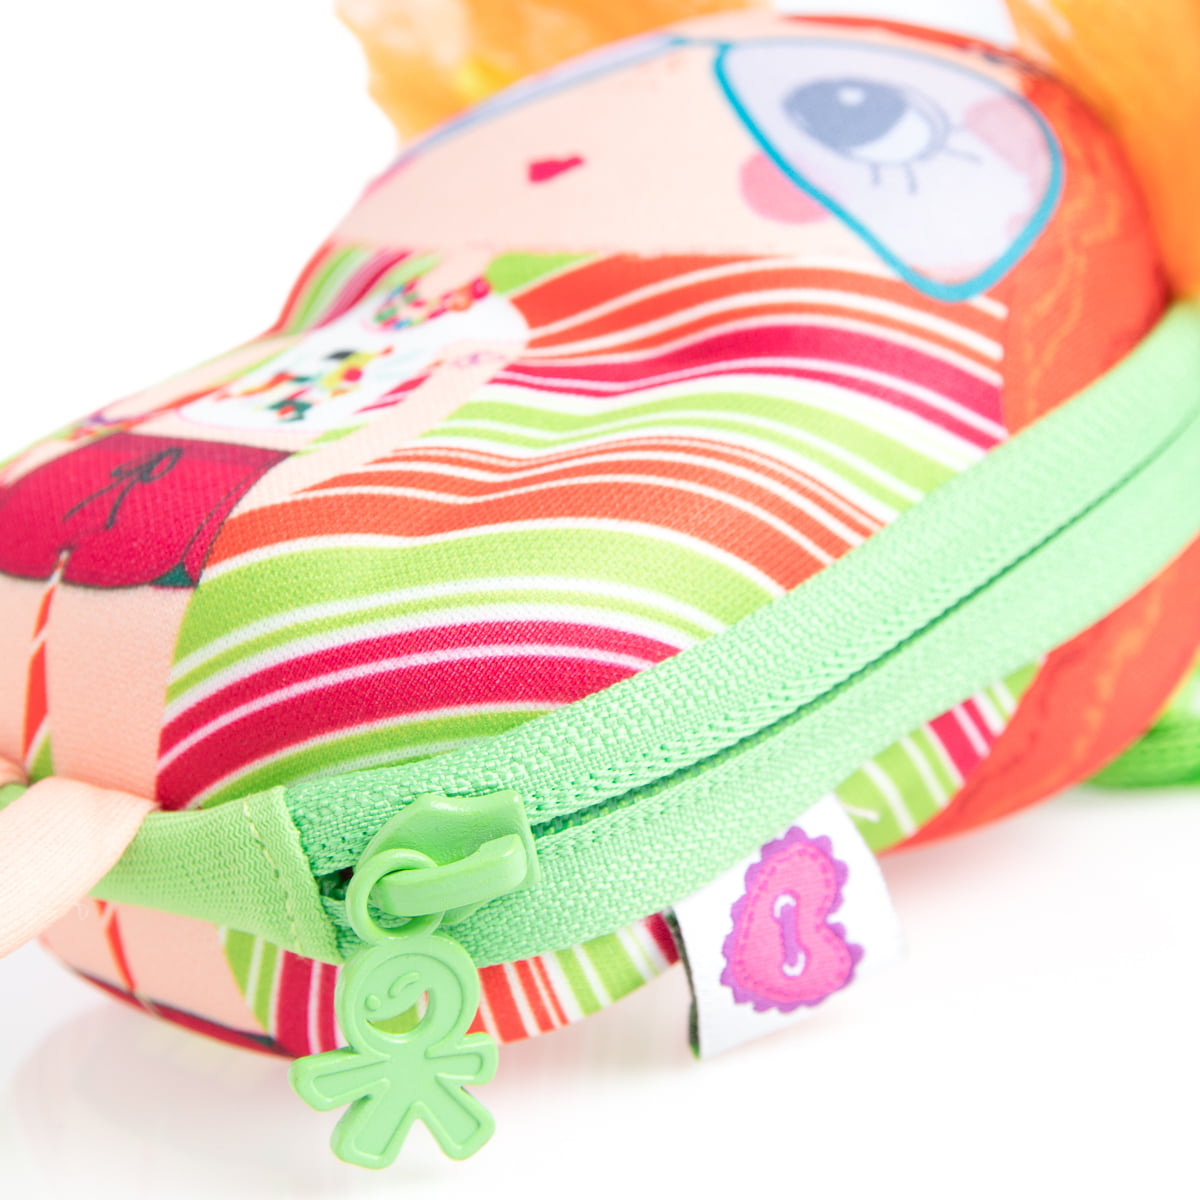 Tiny Treasures Kids Purse Girls Shoulder Bag Toys Baby Doll Accessories Jewelry 